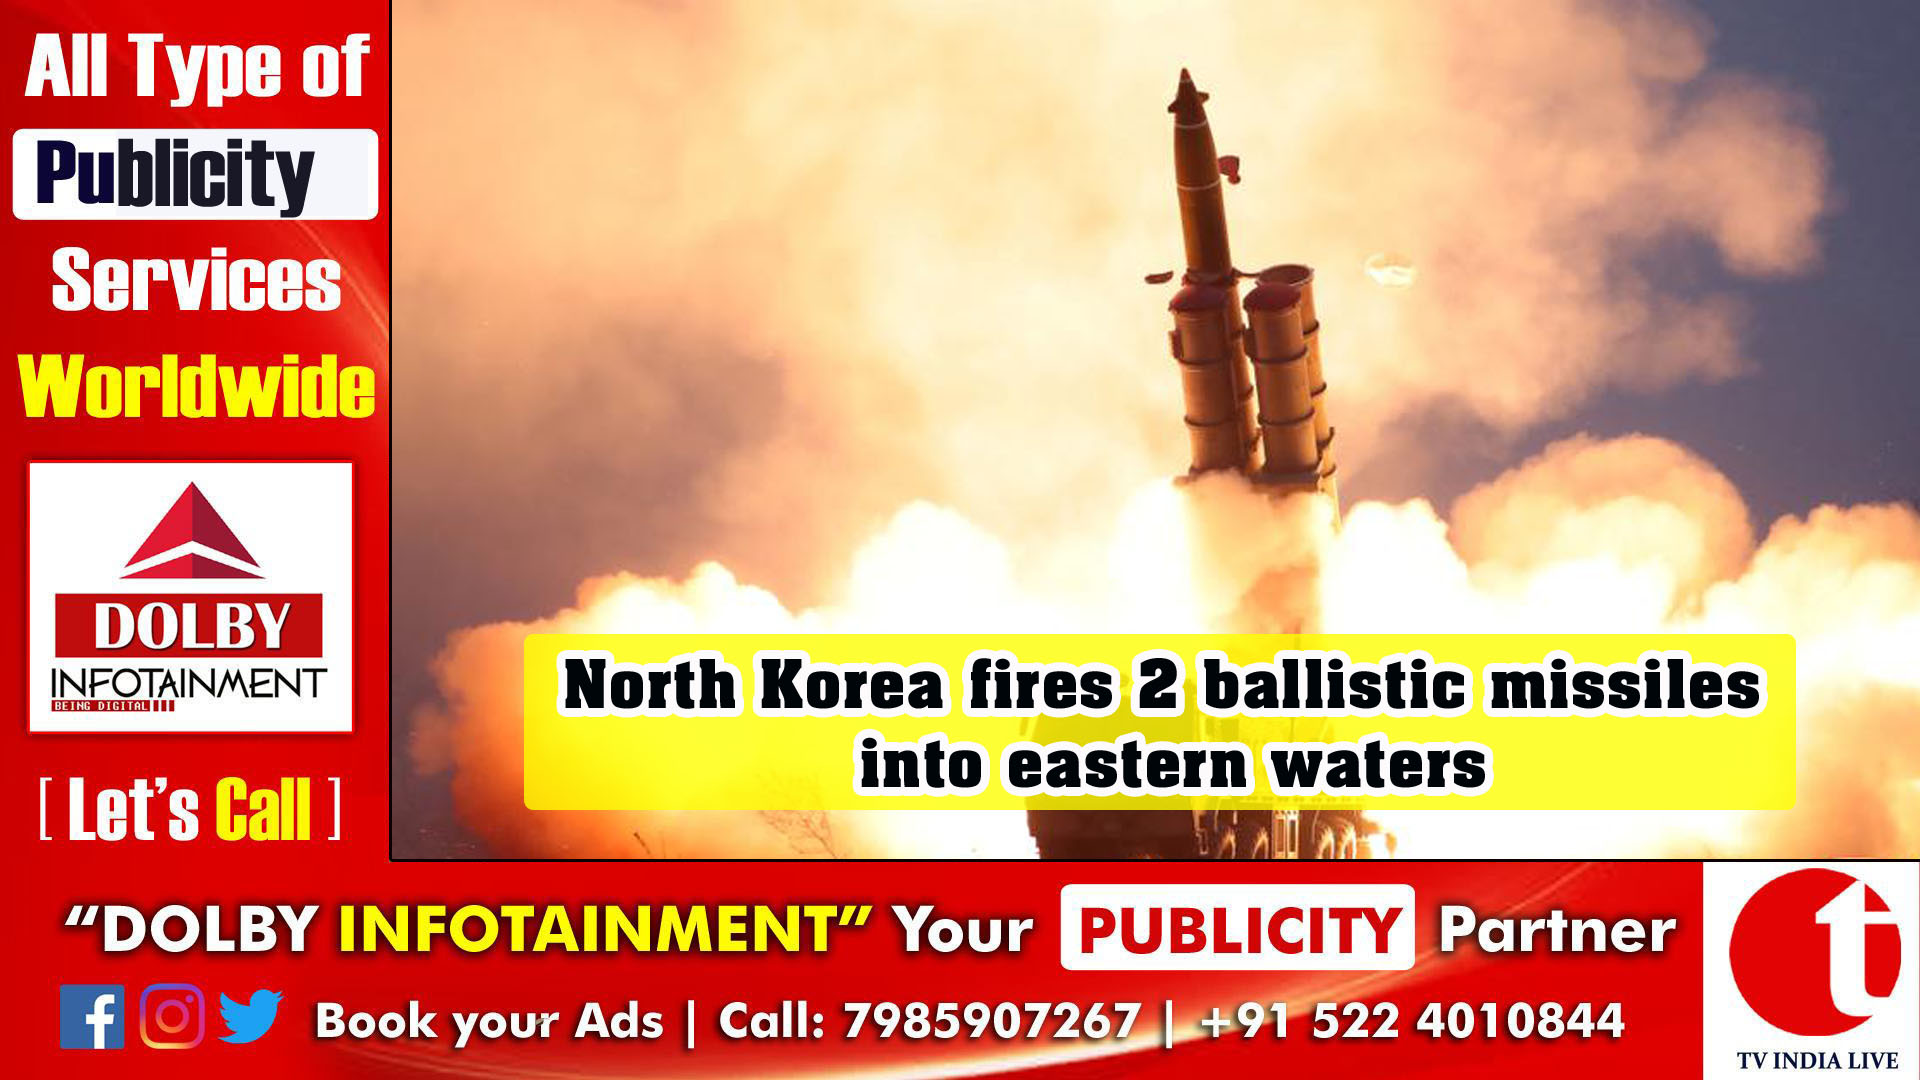 North Korea fires 2 ballistic missiles into eastern waters